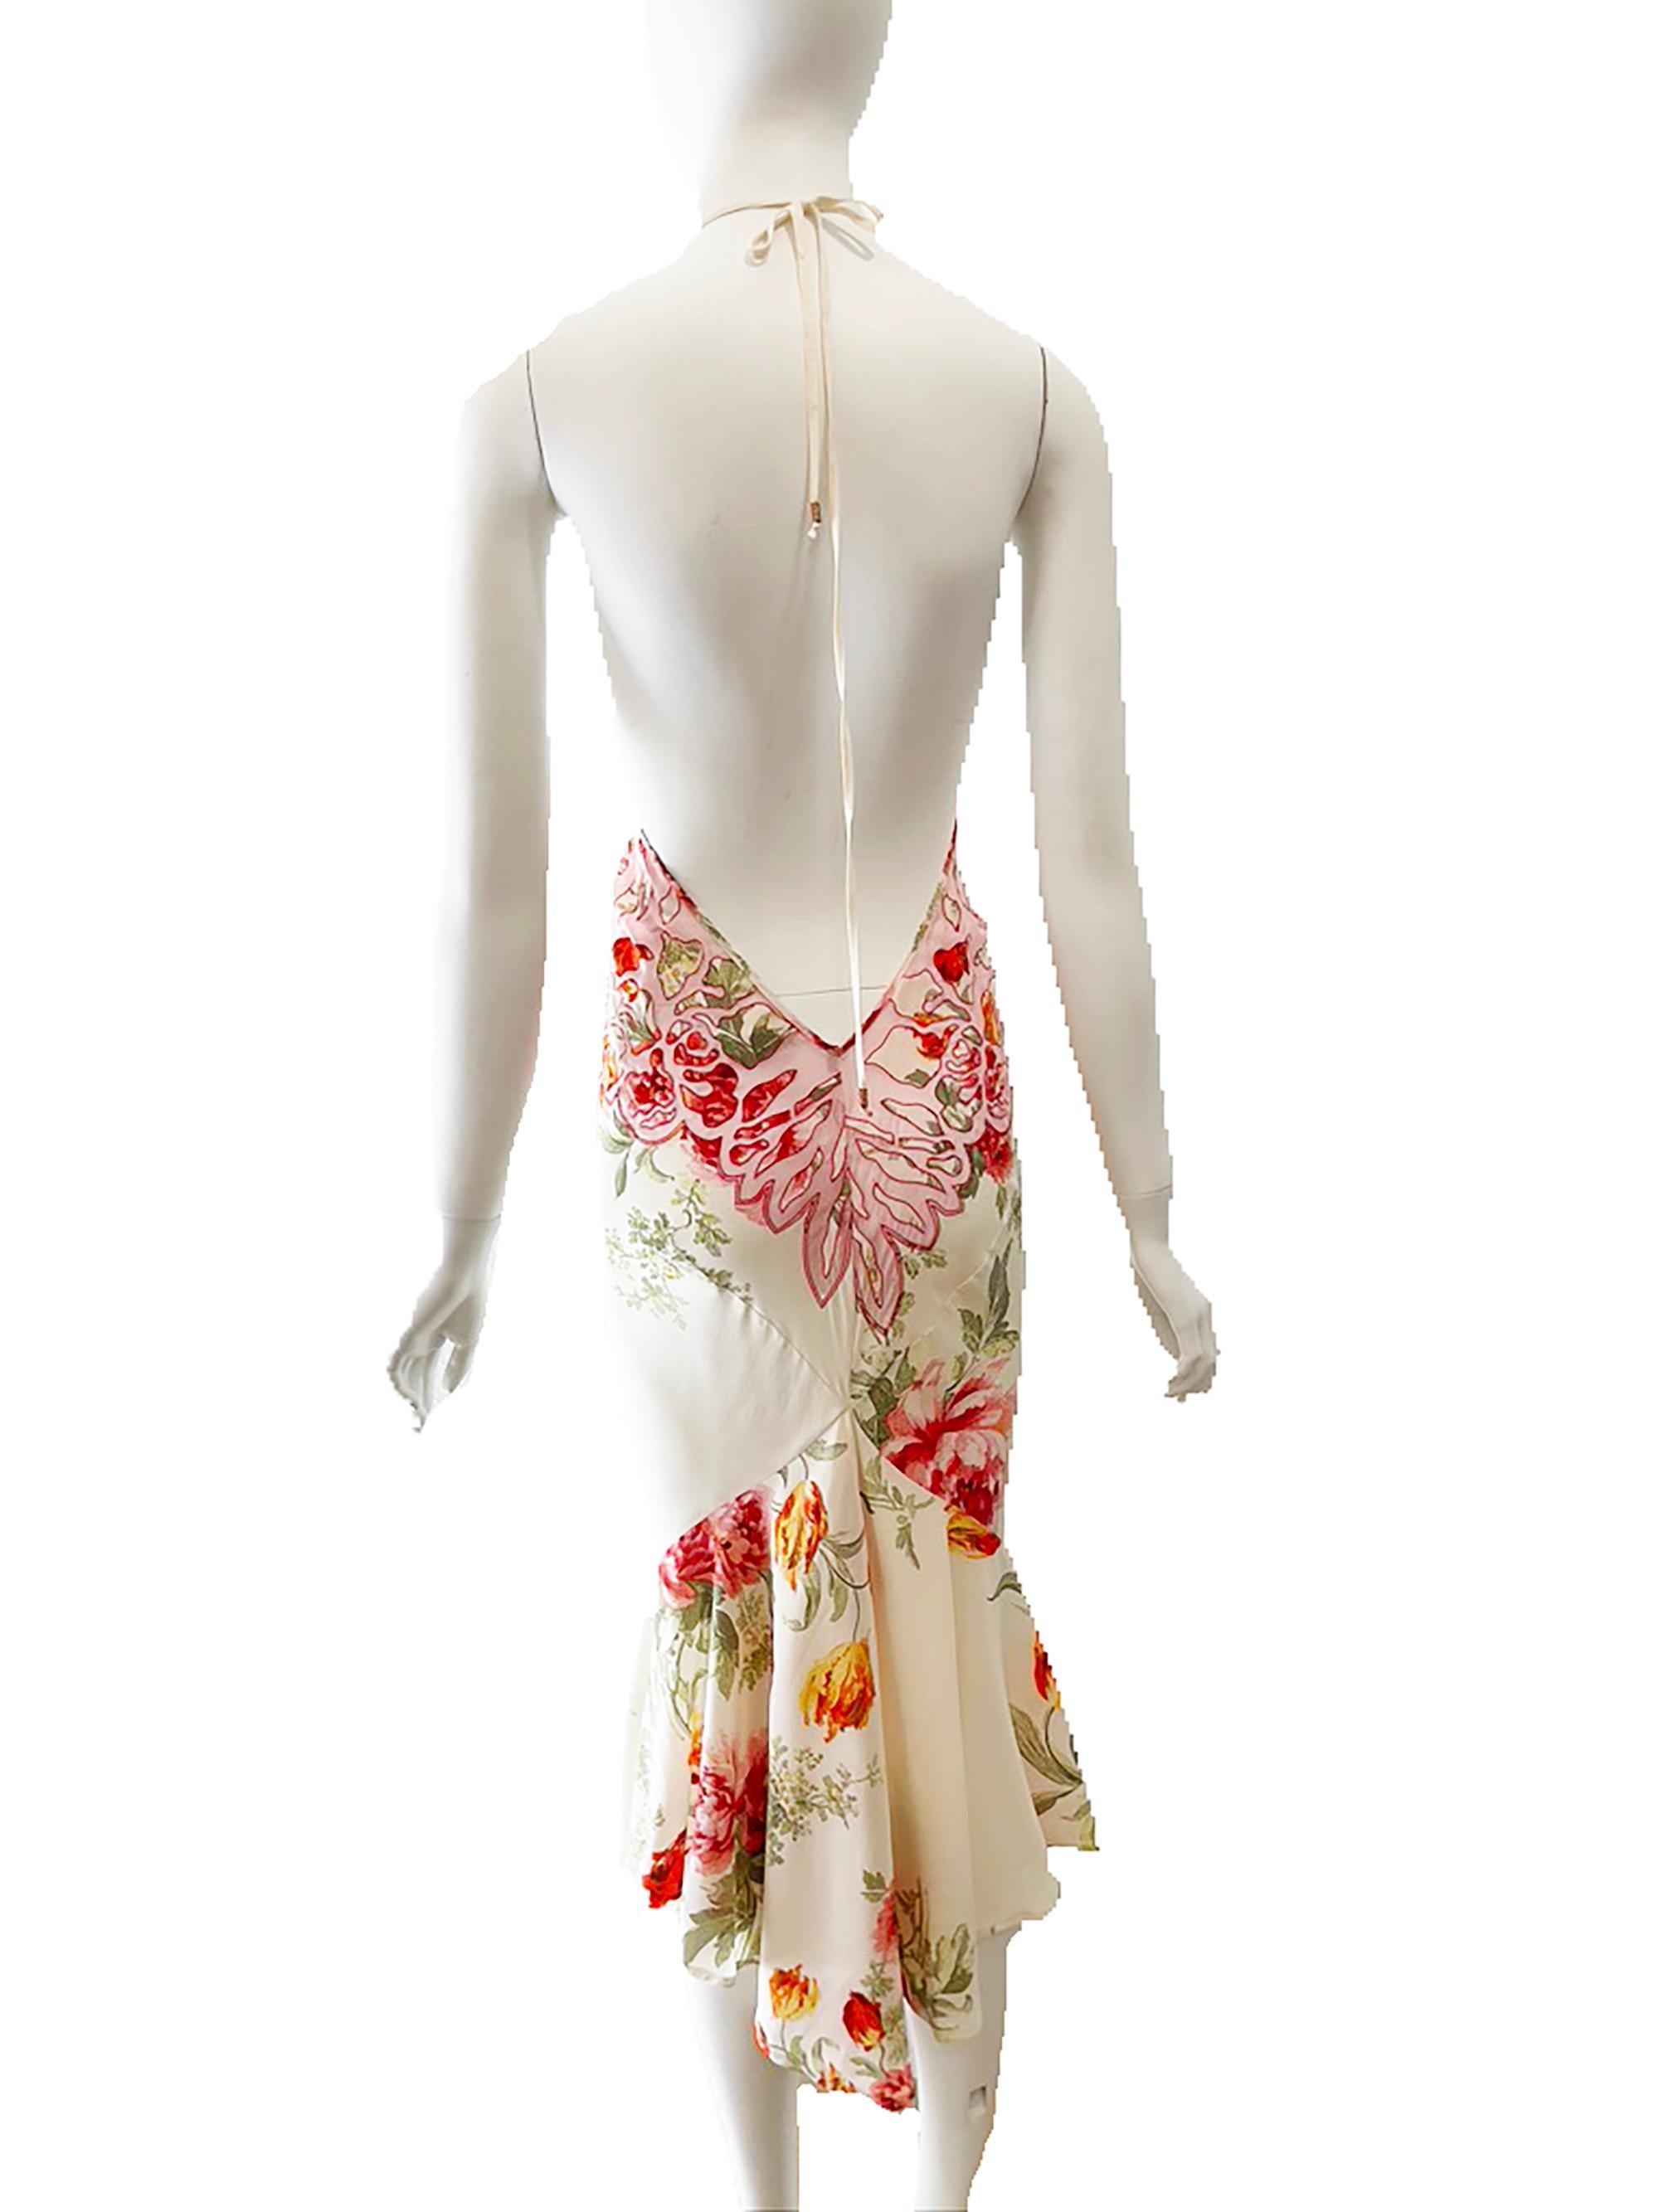 S/S 2002 Roberto Cavalli Sheer Floral Silk Backless Dress In Good Condition In Austin, TX